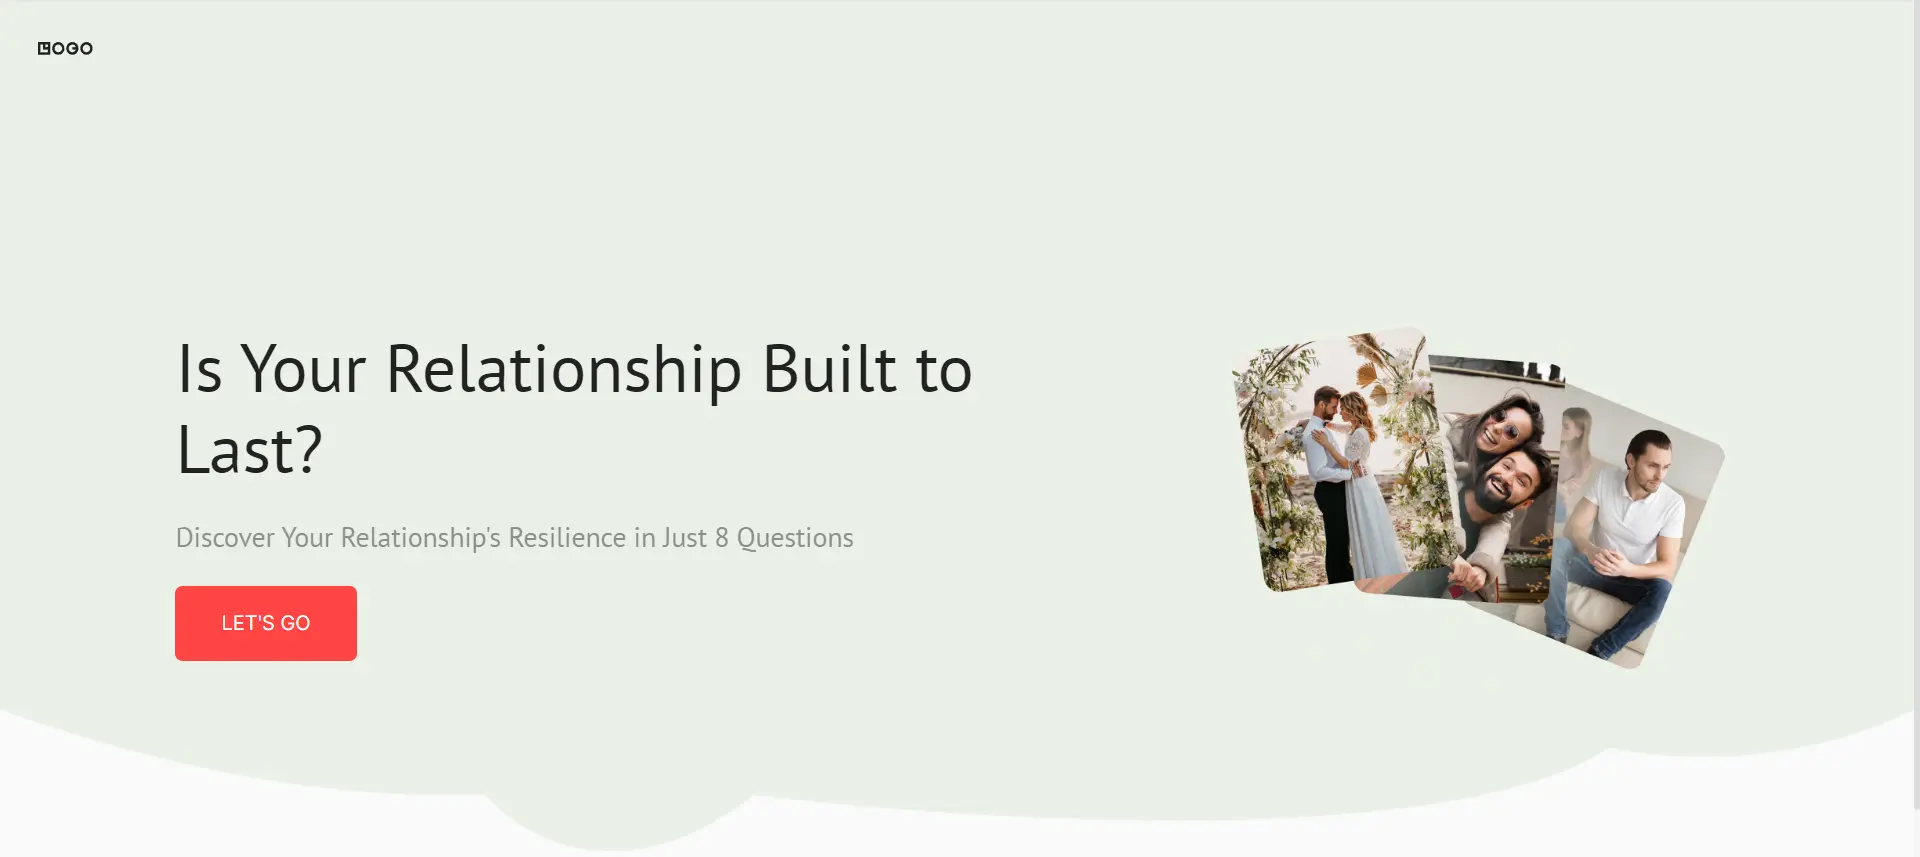 Is Your Relationship Built to Last